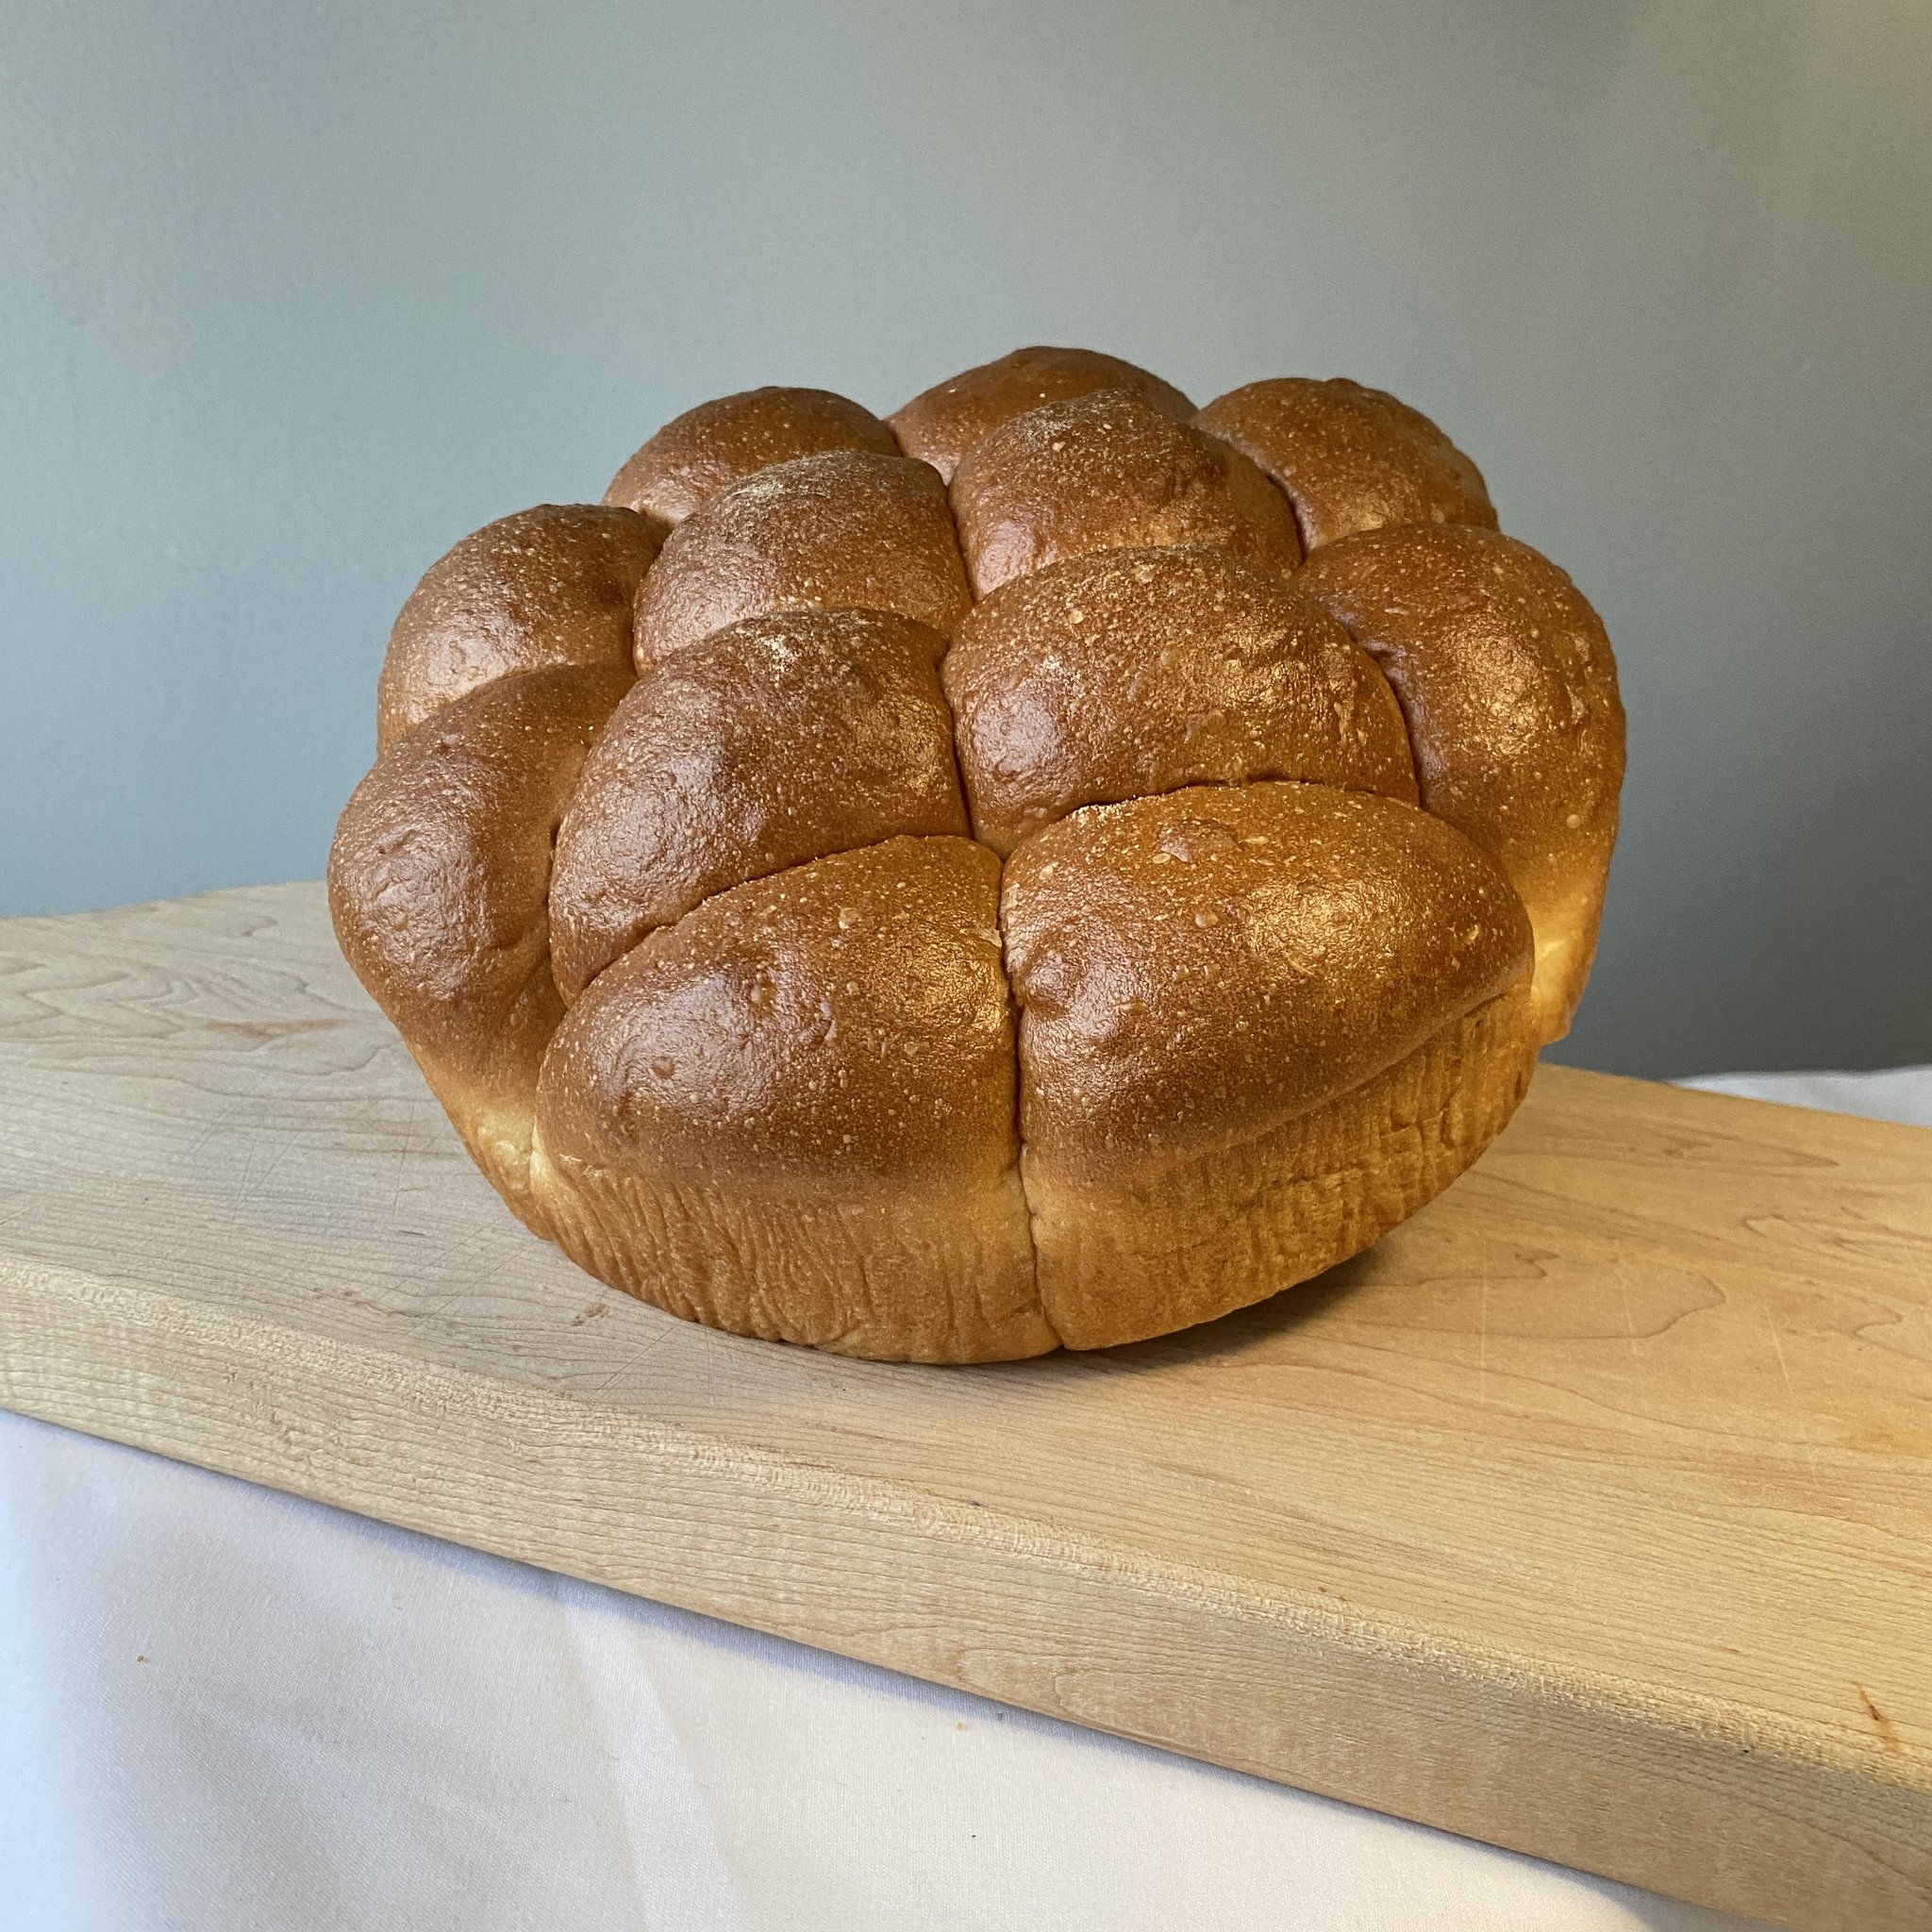 A large pull-apart bread roll sits on a wooden board on a white counter. Photo from Central Illinois Bakehouse website.